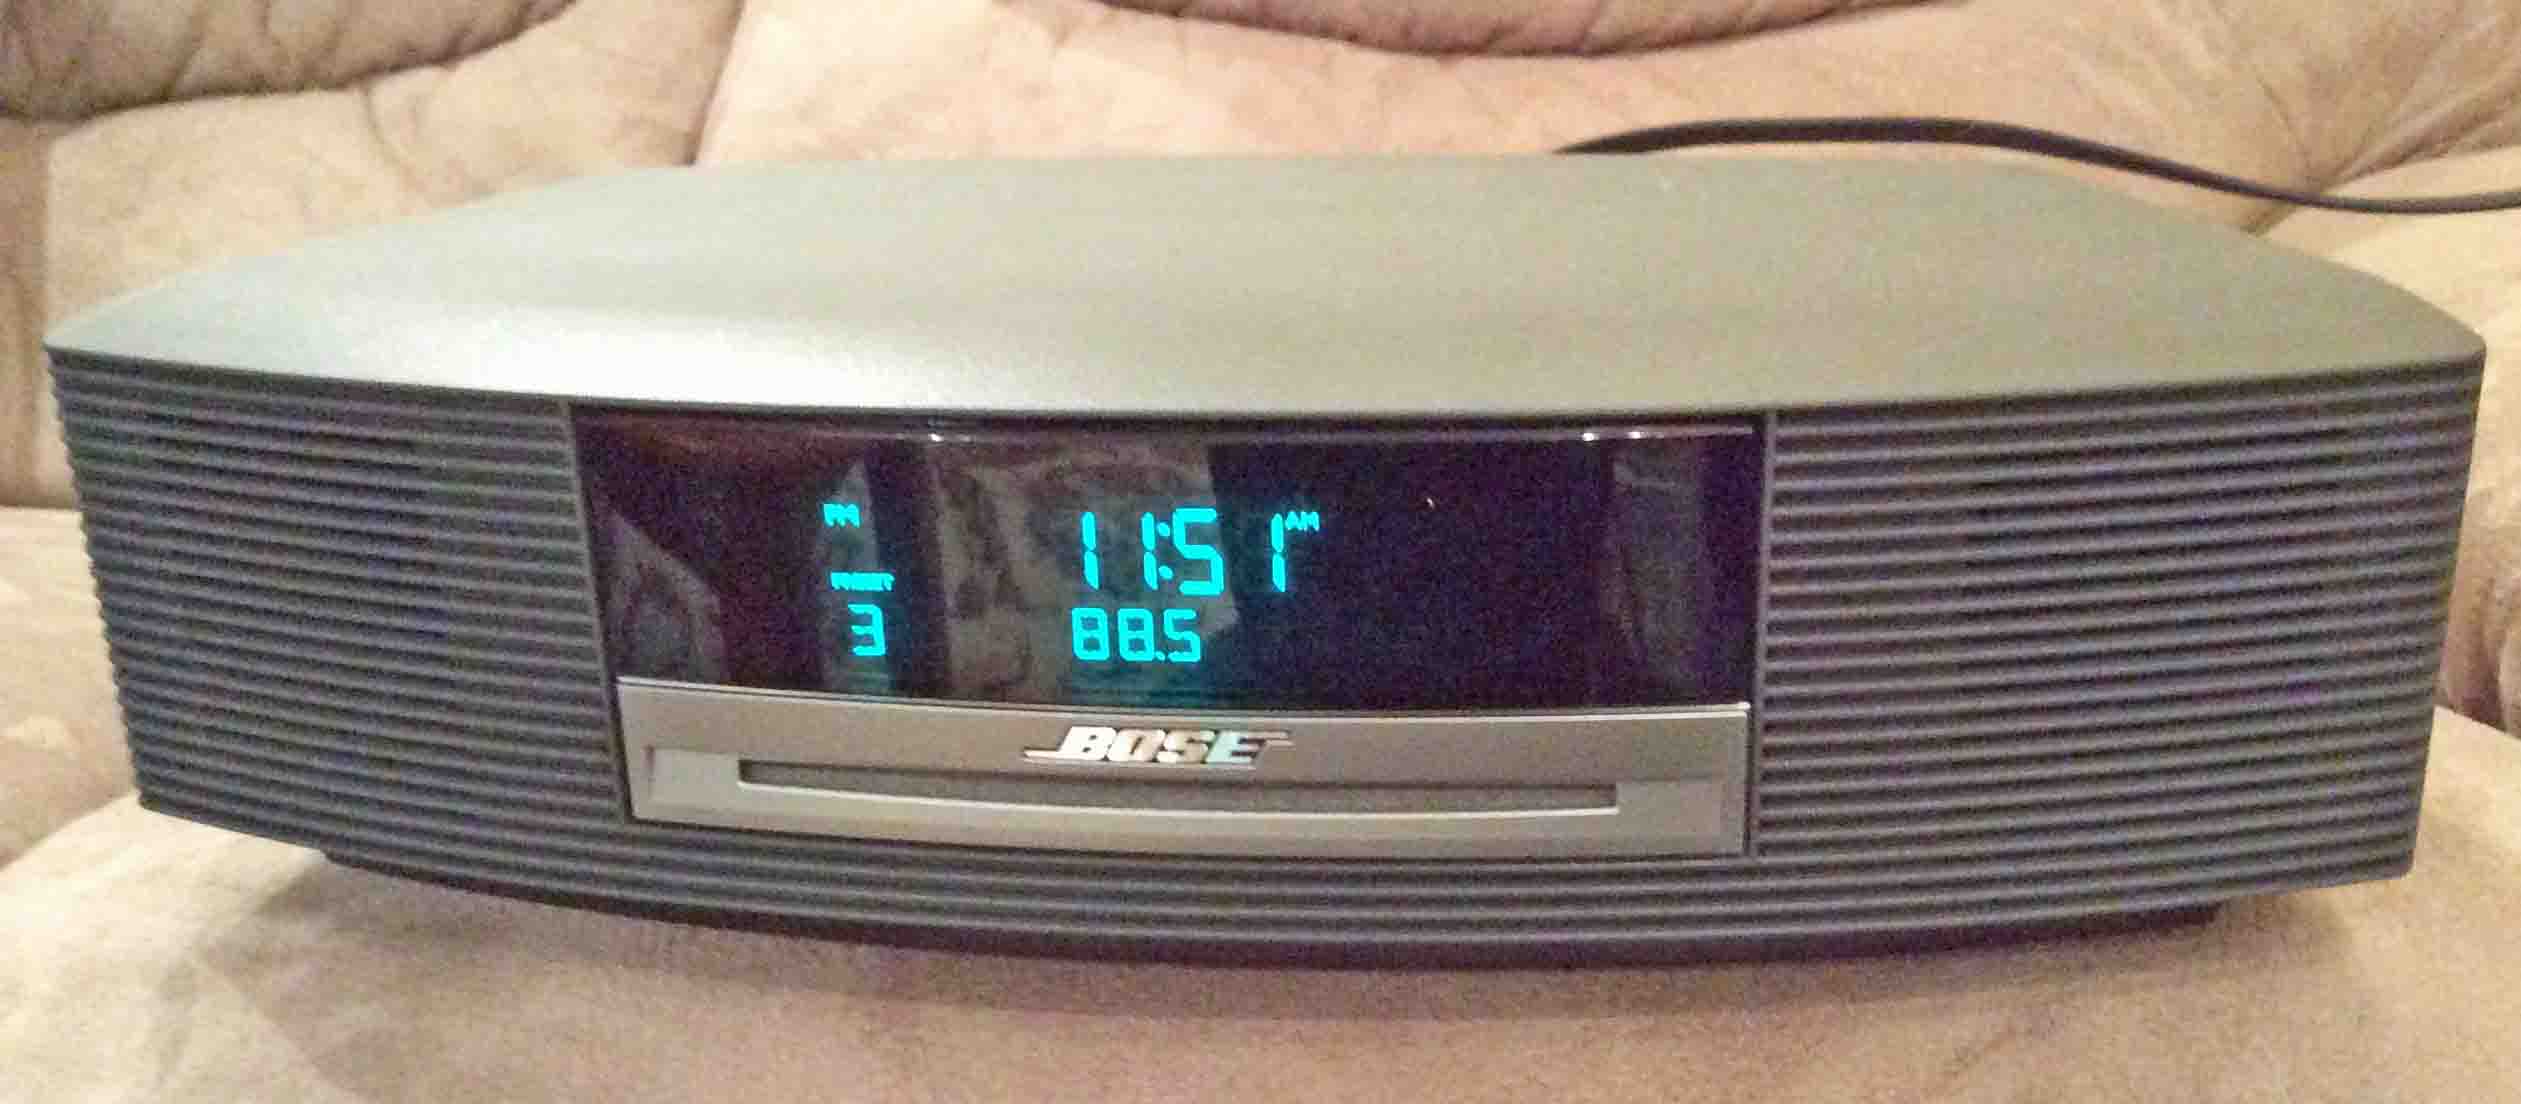 Bose Bose Wave Radio CD Player Stereo Alarm Clock Parts only 